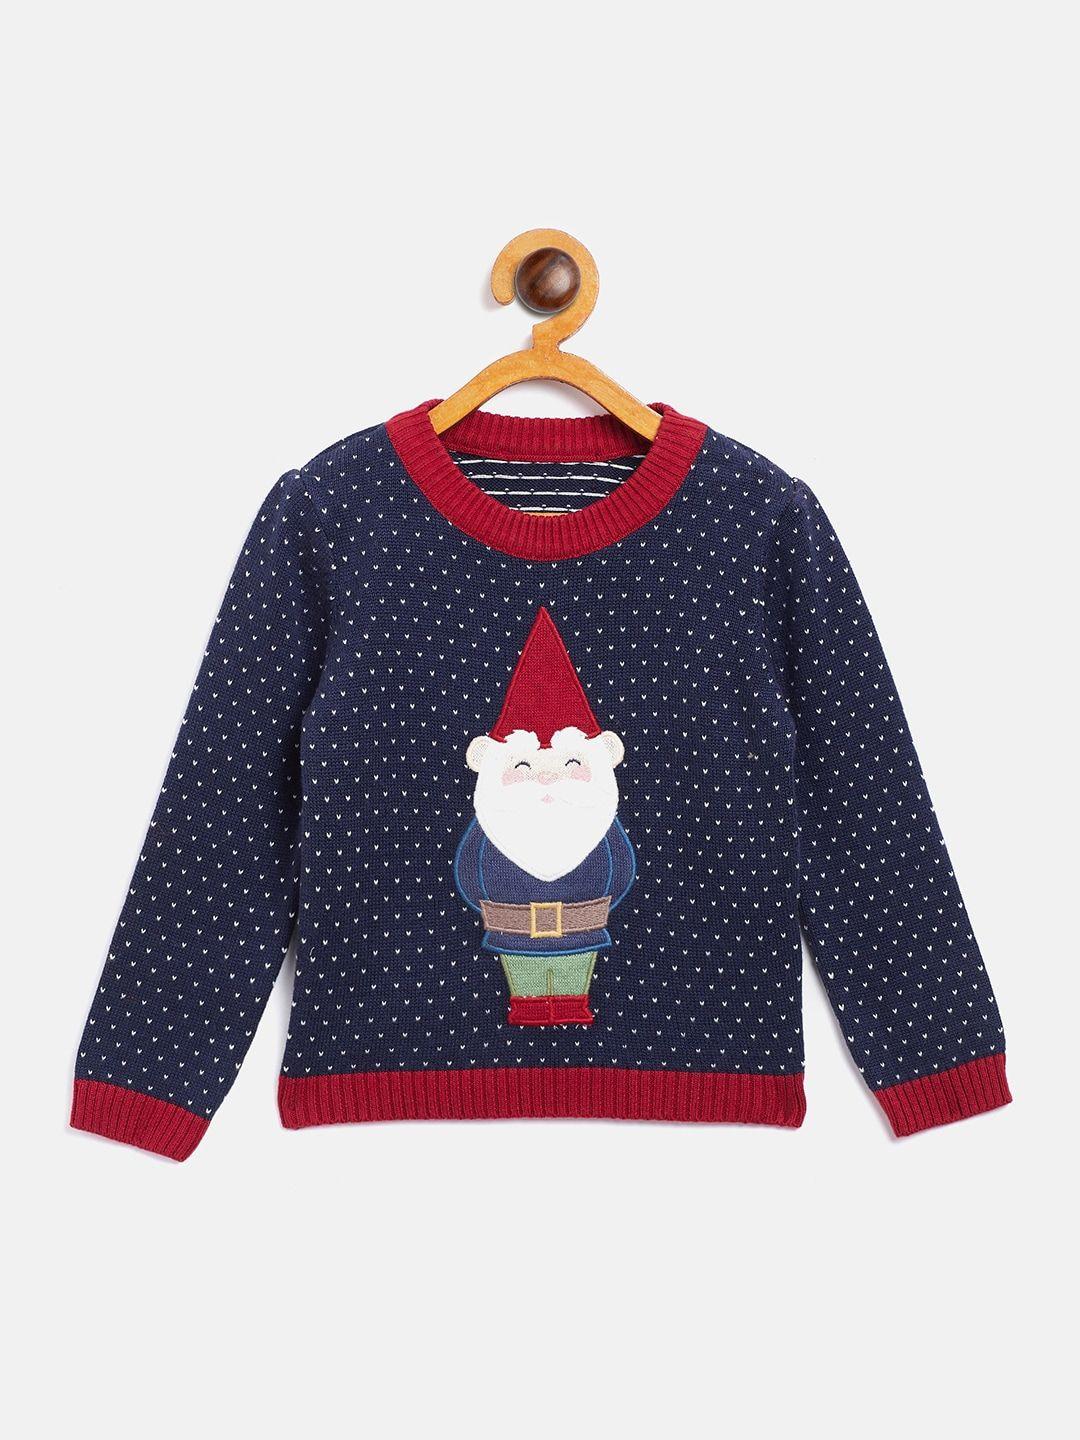 jwaaq-boys-navy-blue-&-red-embroidered-pullover-sweater